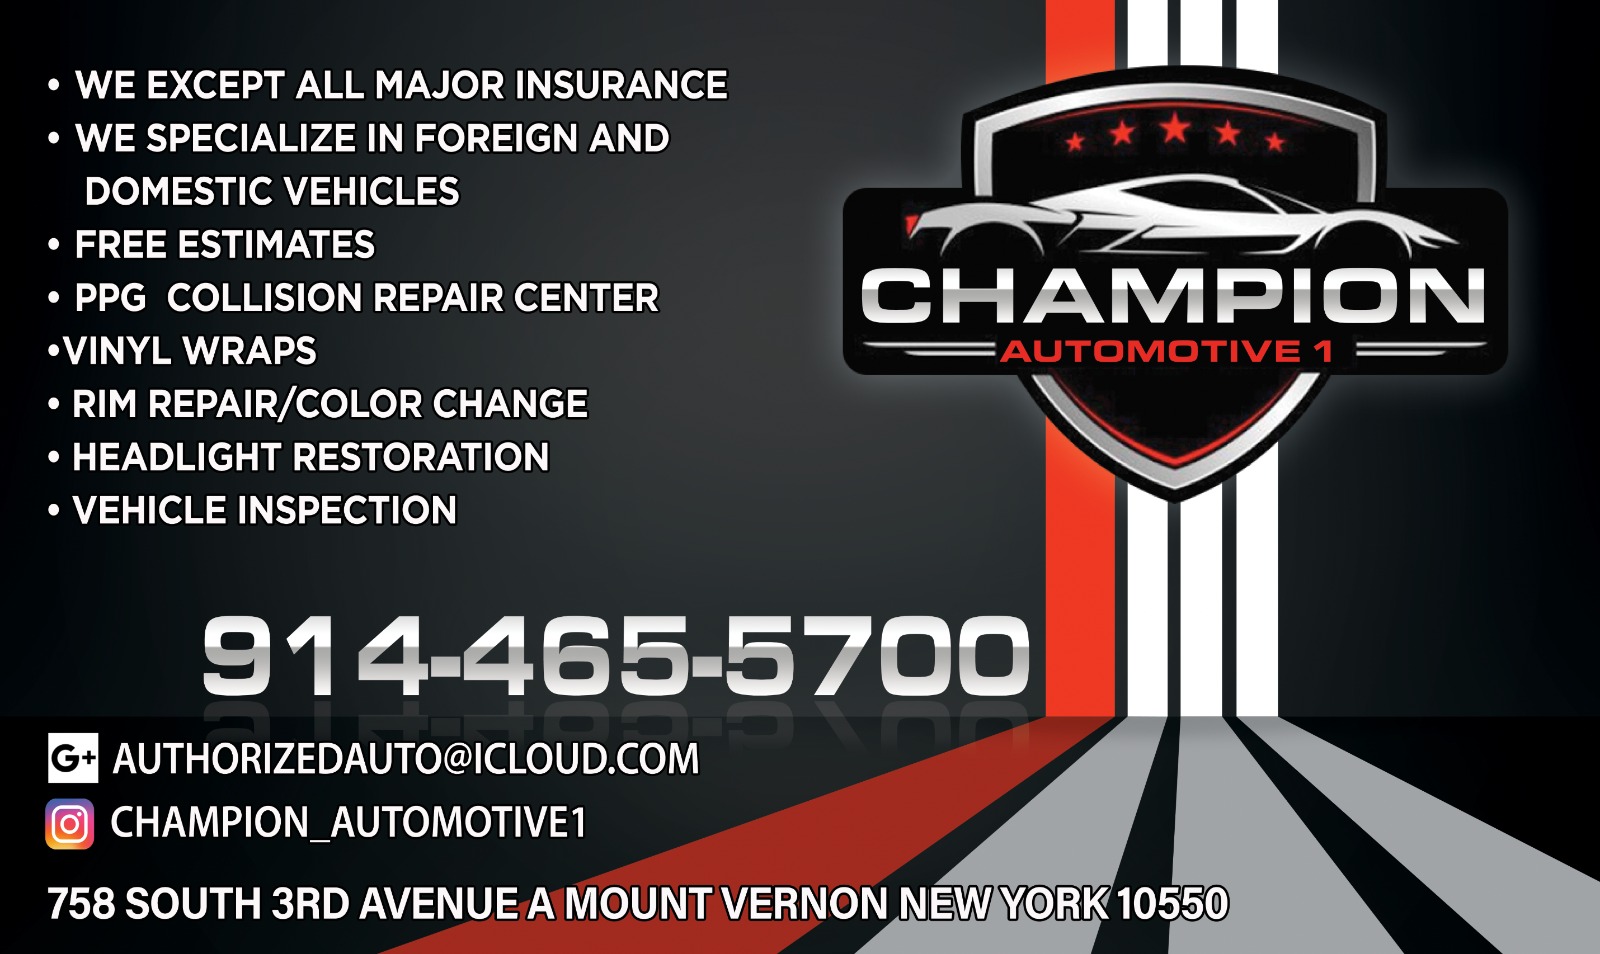 Champion Automotive1 offers quality towing and roadside services to Westchester County residents.